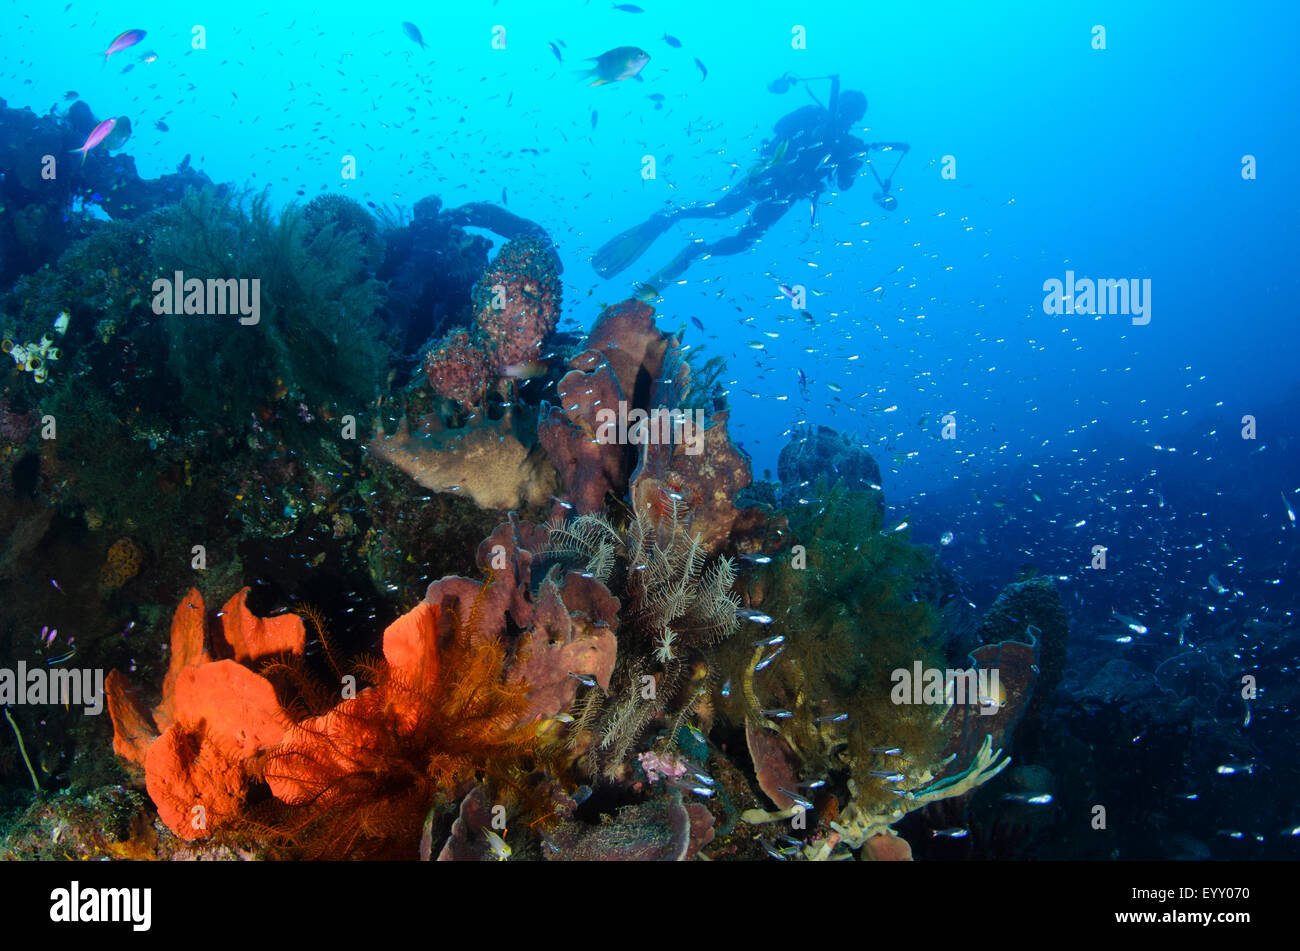 A diving photographer silhouetted in the background of a coral reef scene, Parigi Moutong, Central Sulawesi, Indonesia, Pacific Stock Photo